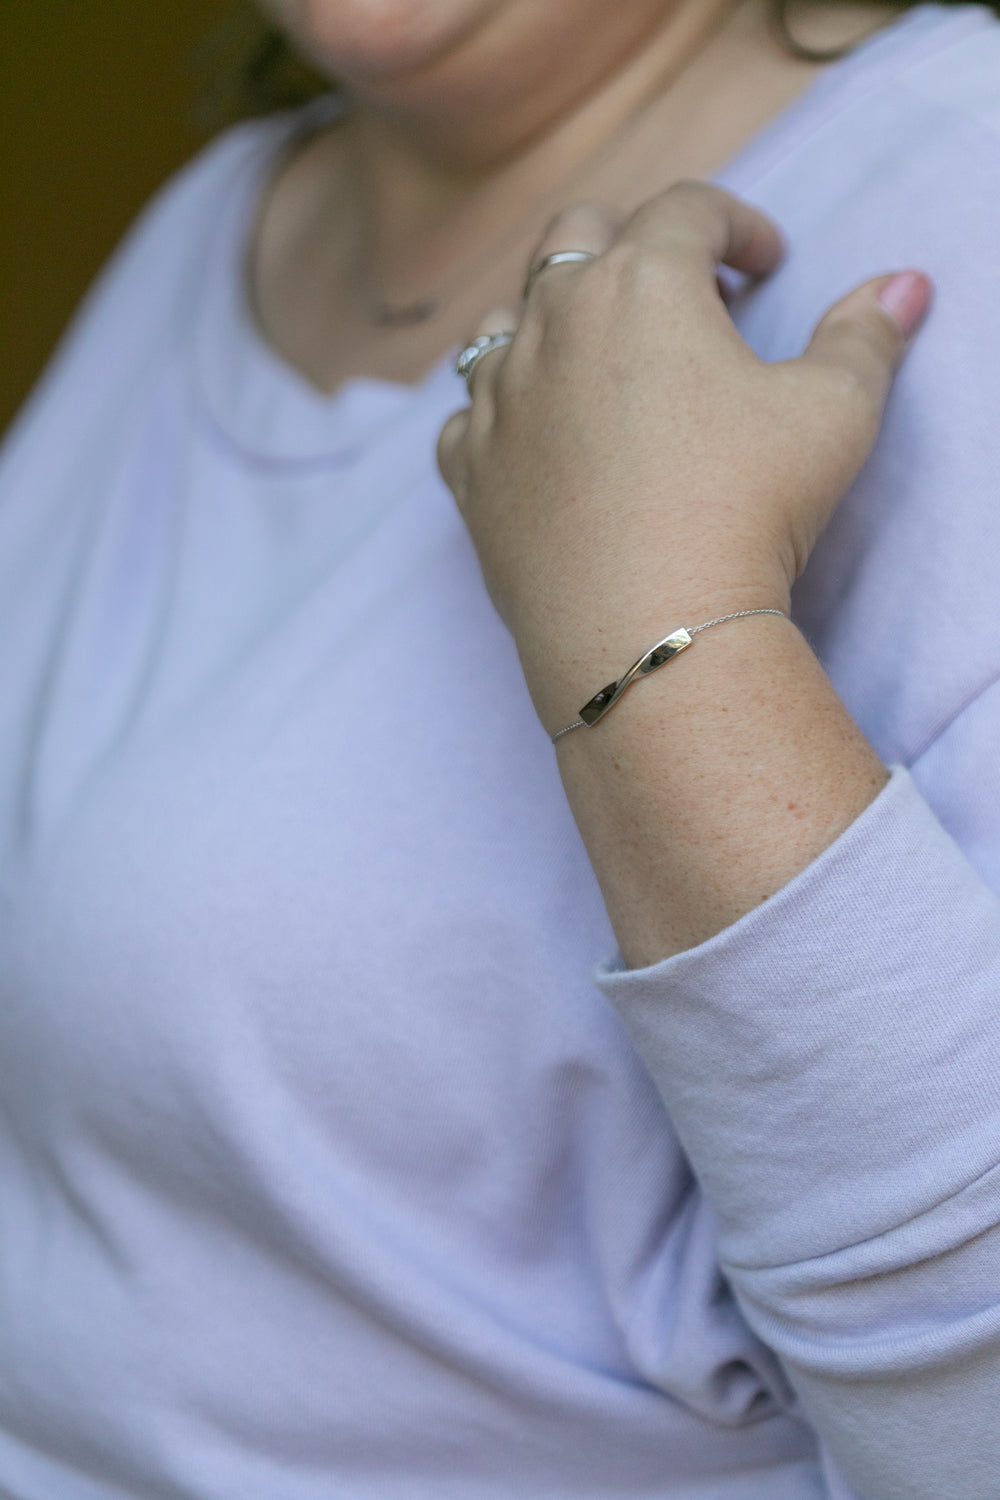 a close up image of a woman's wrist wearing the silver twist bracelet and a light lilac colored sweatshirt. #color_silver